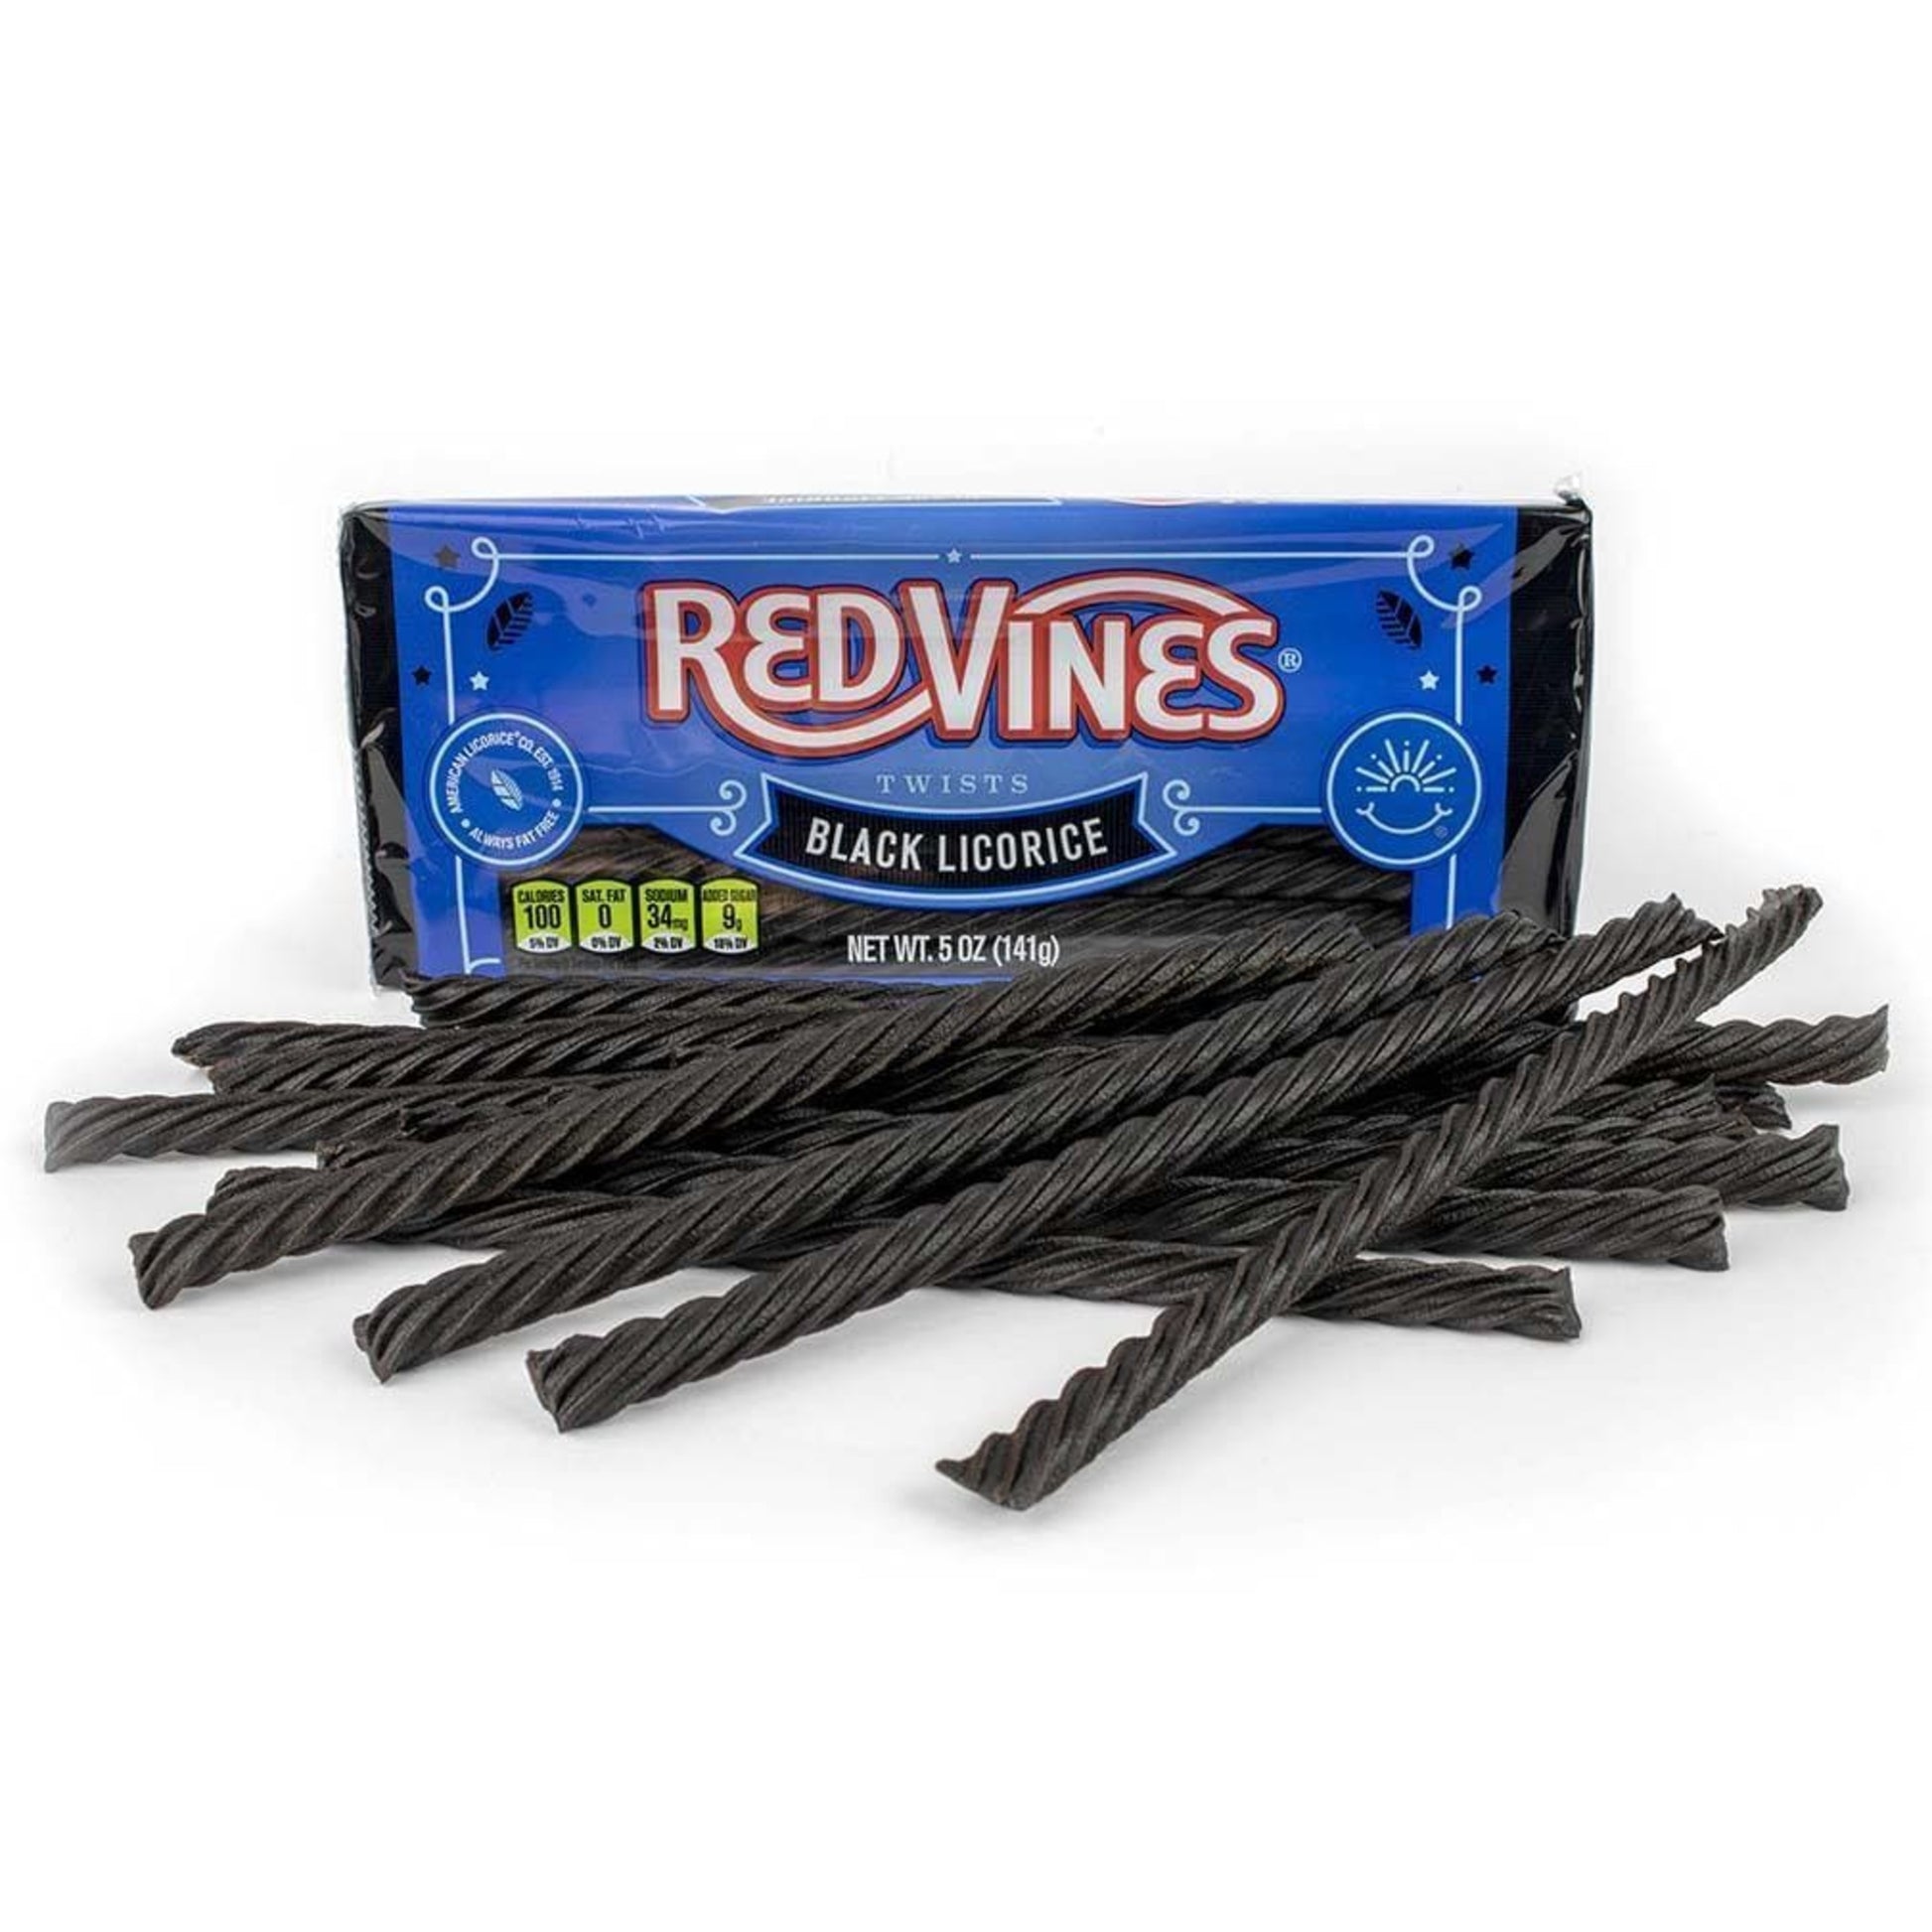 RED VINES Black Licorice Twists 5oz Tray with candy in front